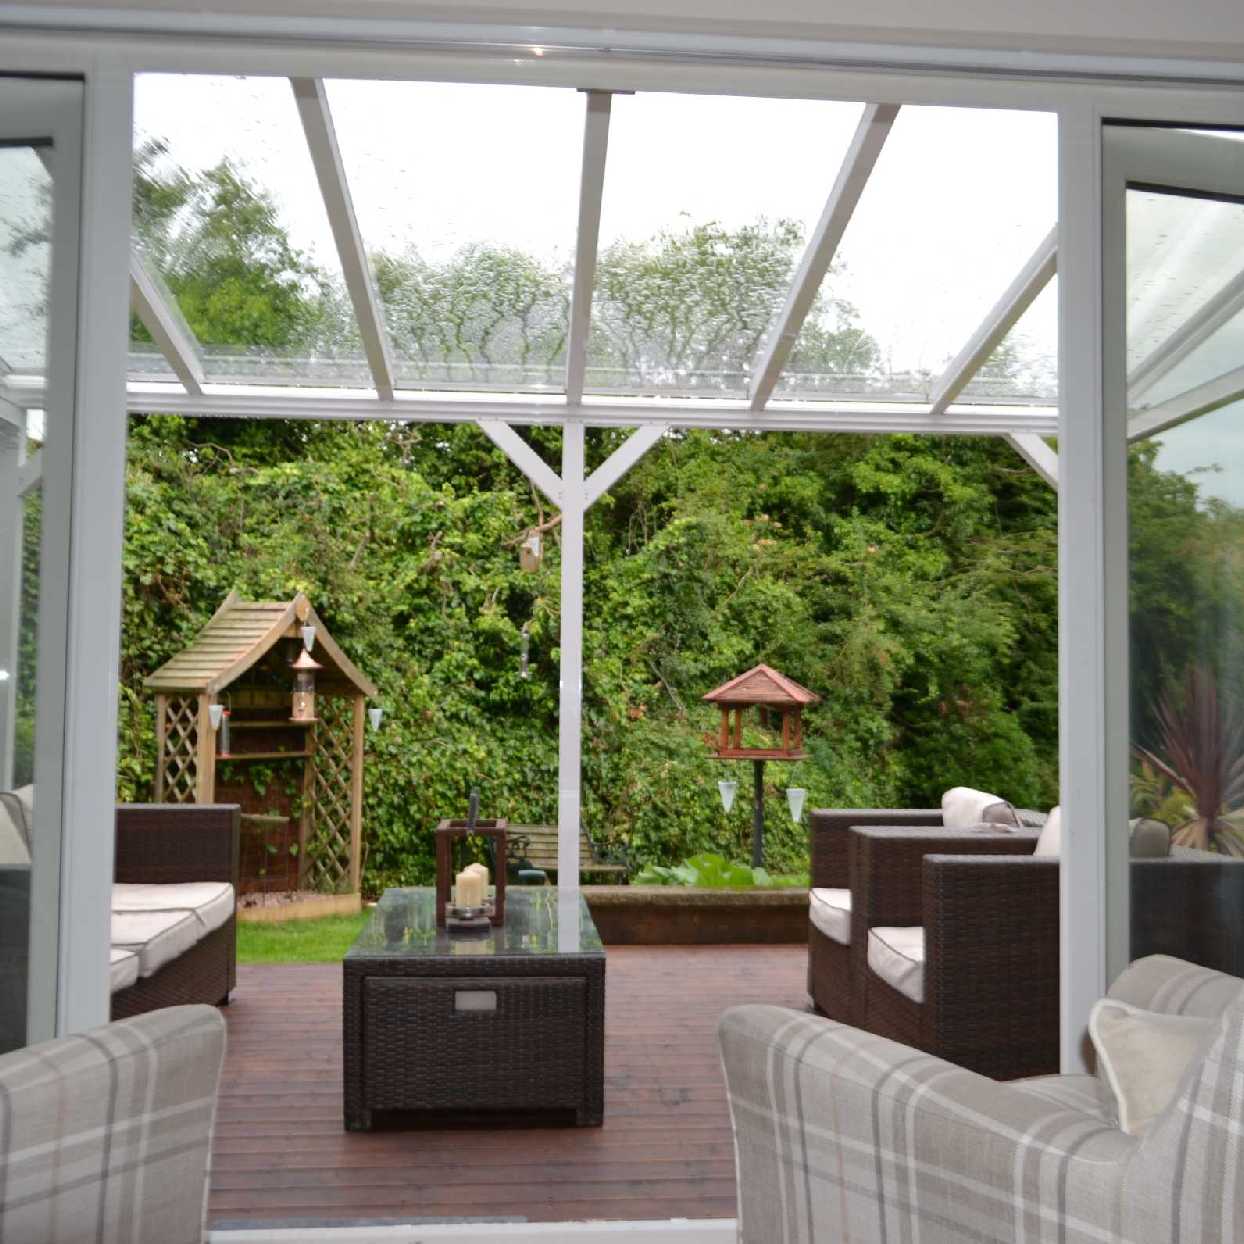 Great selection of Omega Smart Lean-To Canopy, White UNGLAZED for 6mm Glazing - 7.7m (W) x 2.5m (P), (4) Supporting Posts